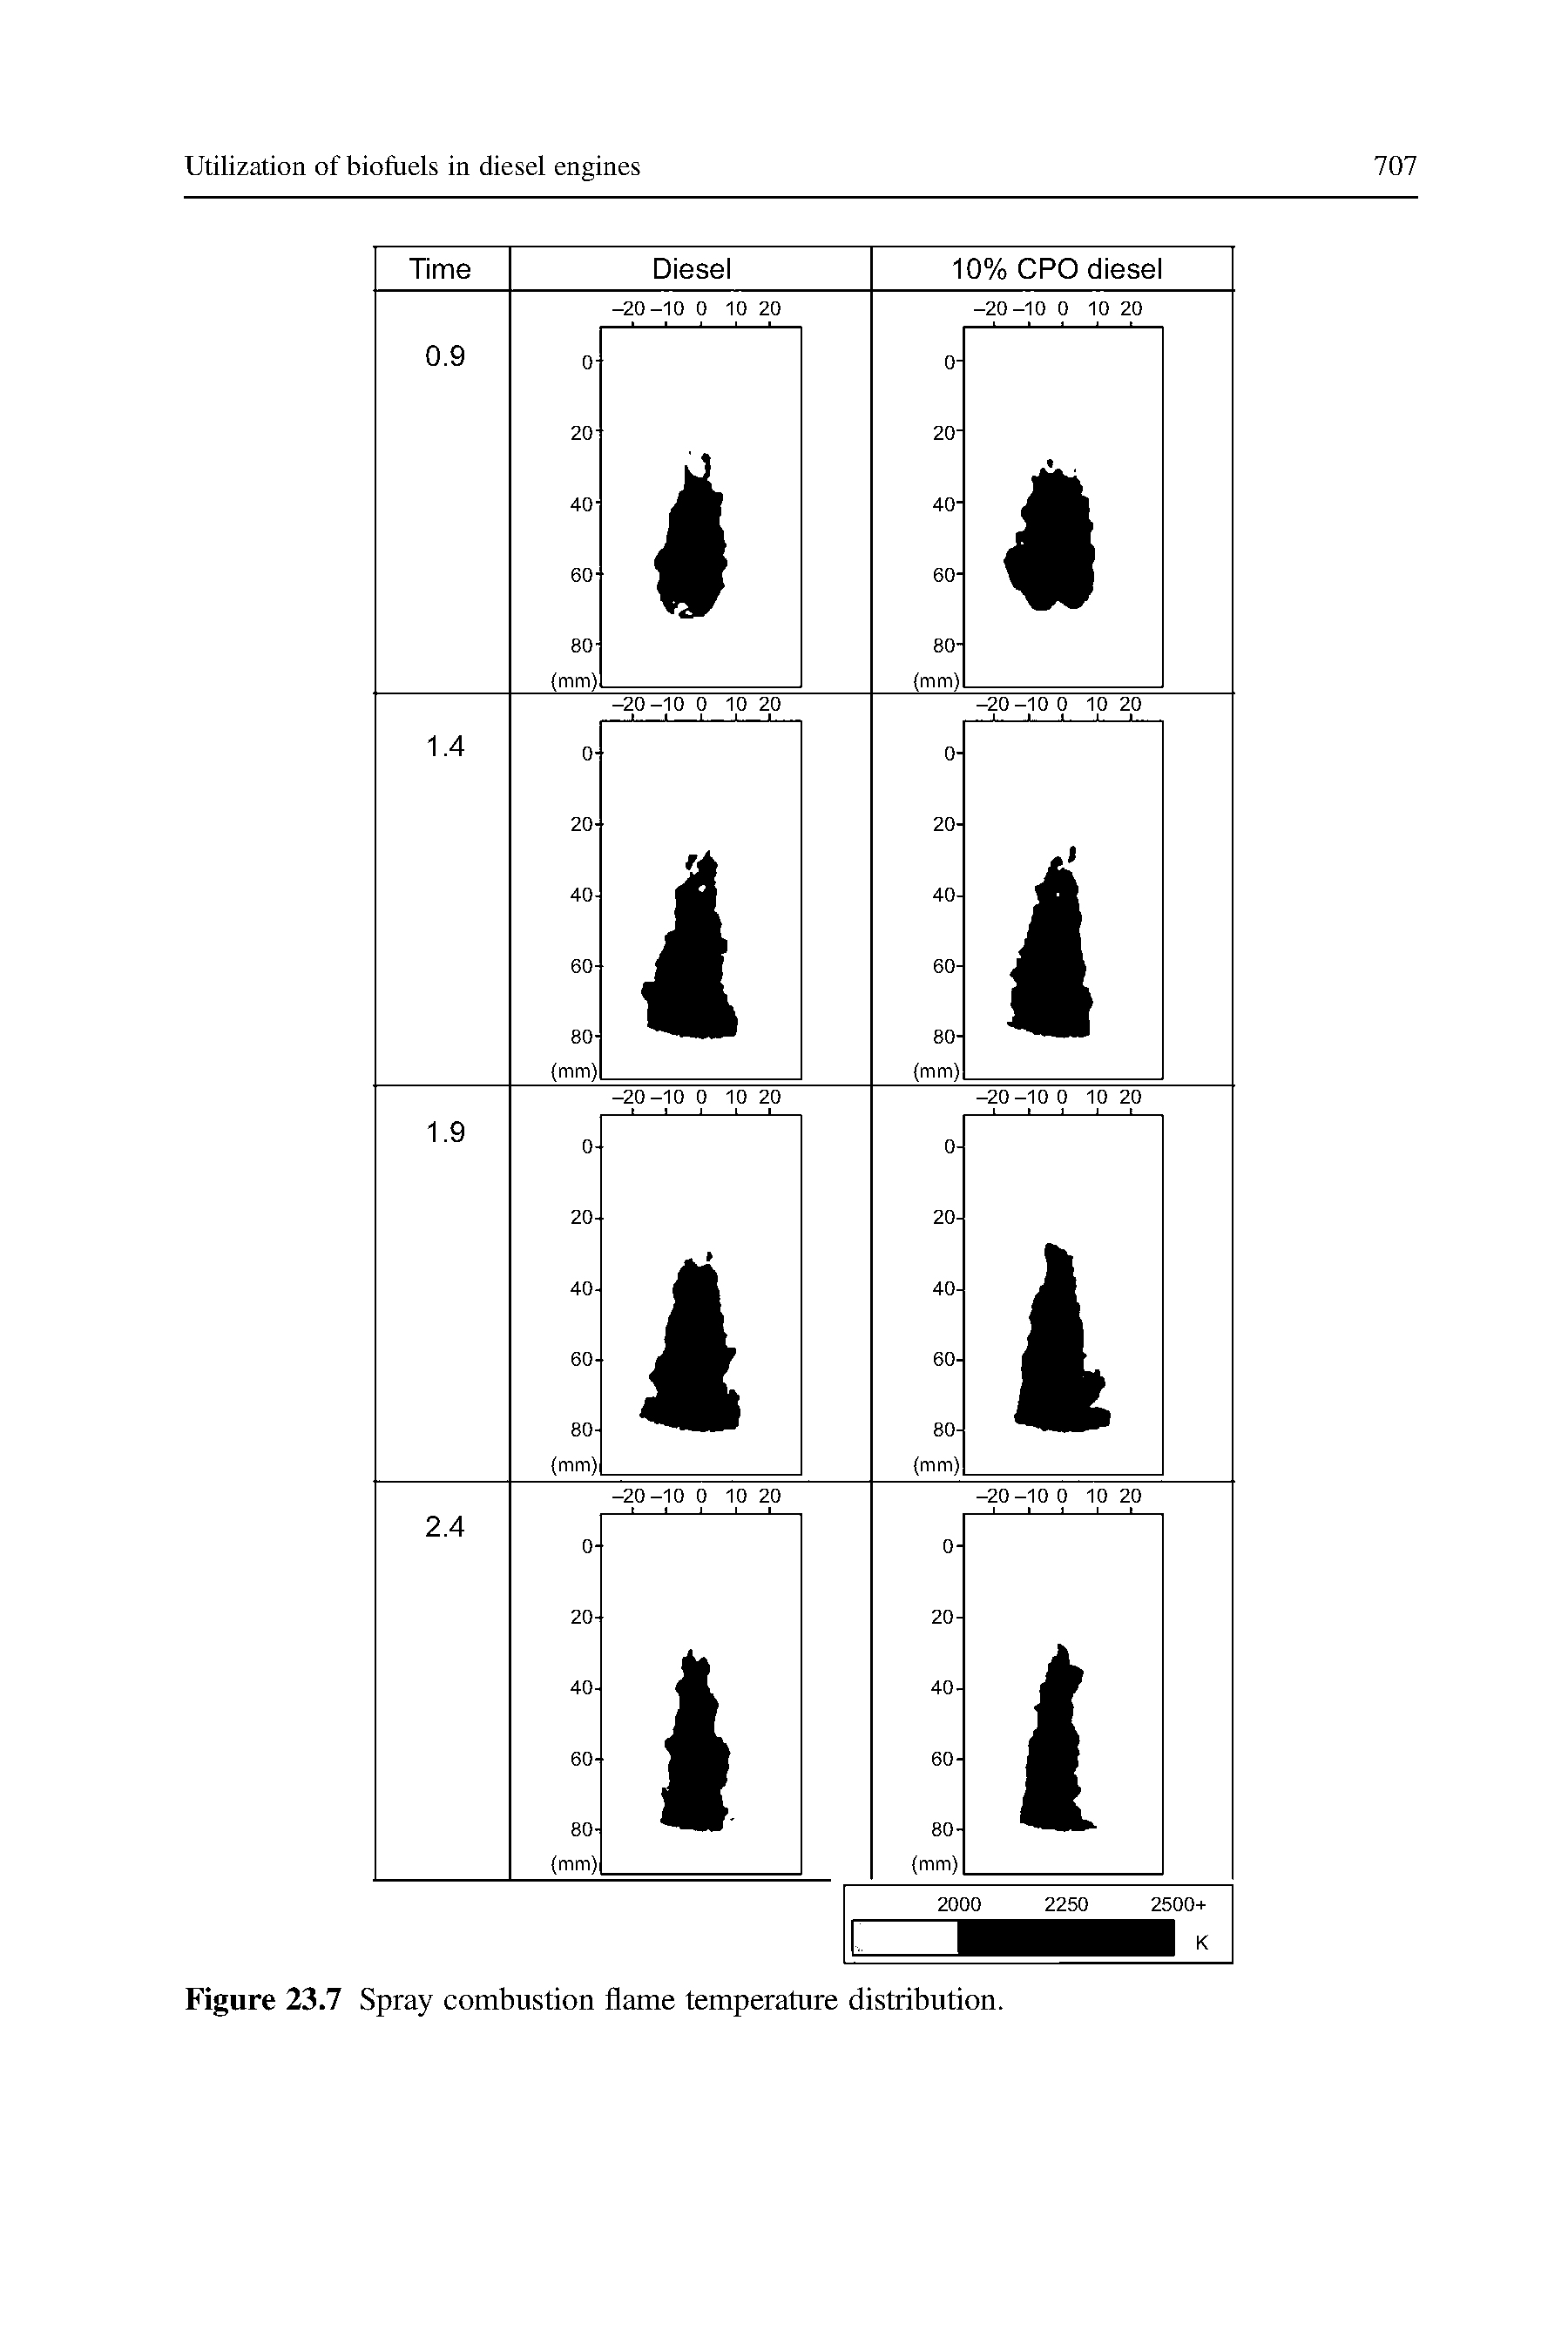 Figure 23.7 Spray combustion flame temperature distribution.